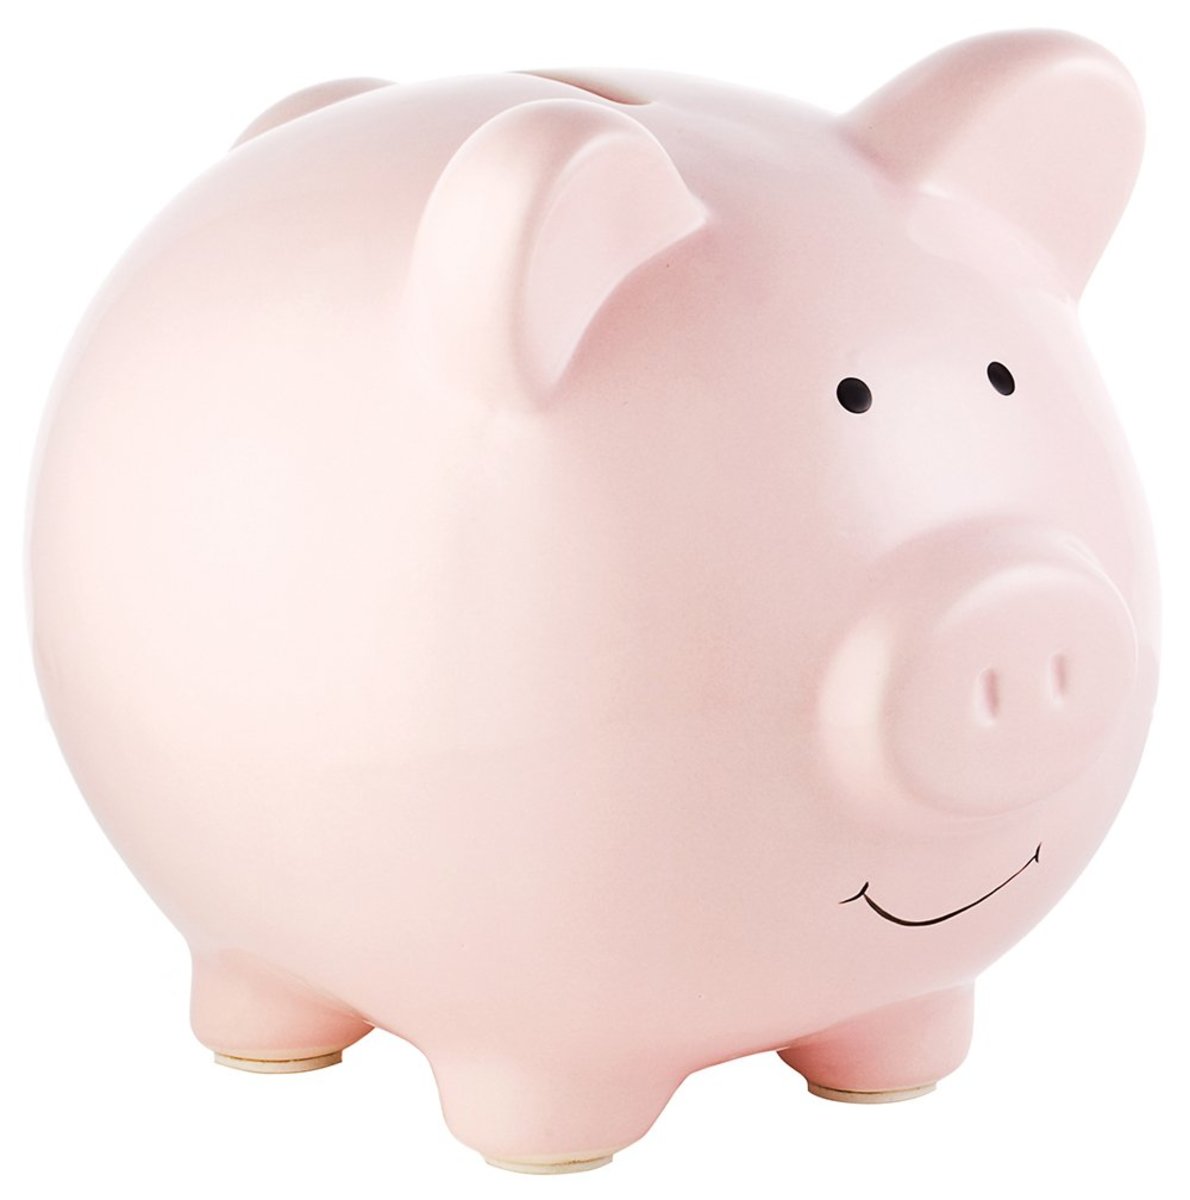 Is it time for people to start putting their donations into their own piggy bank?